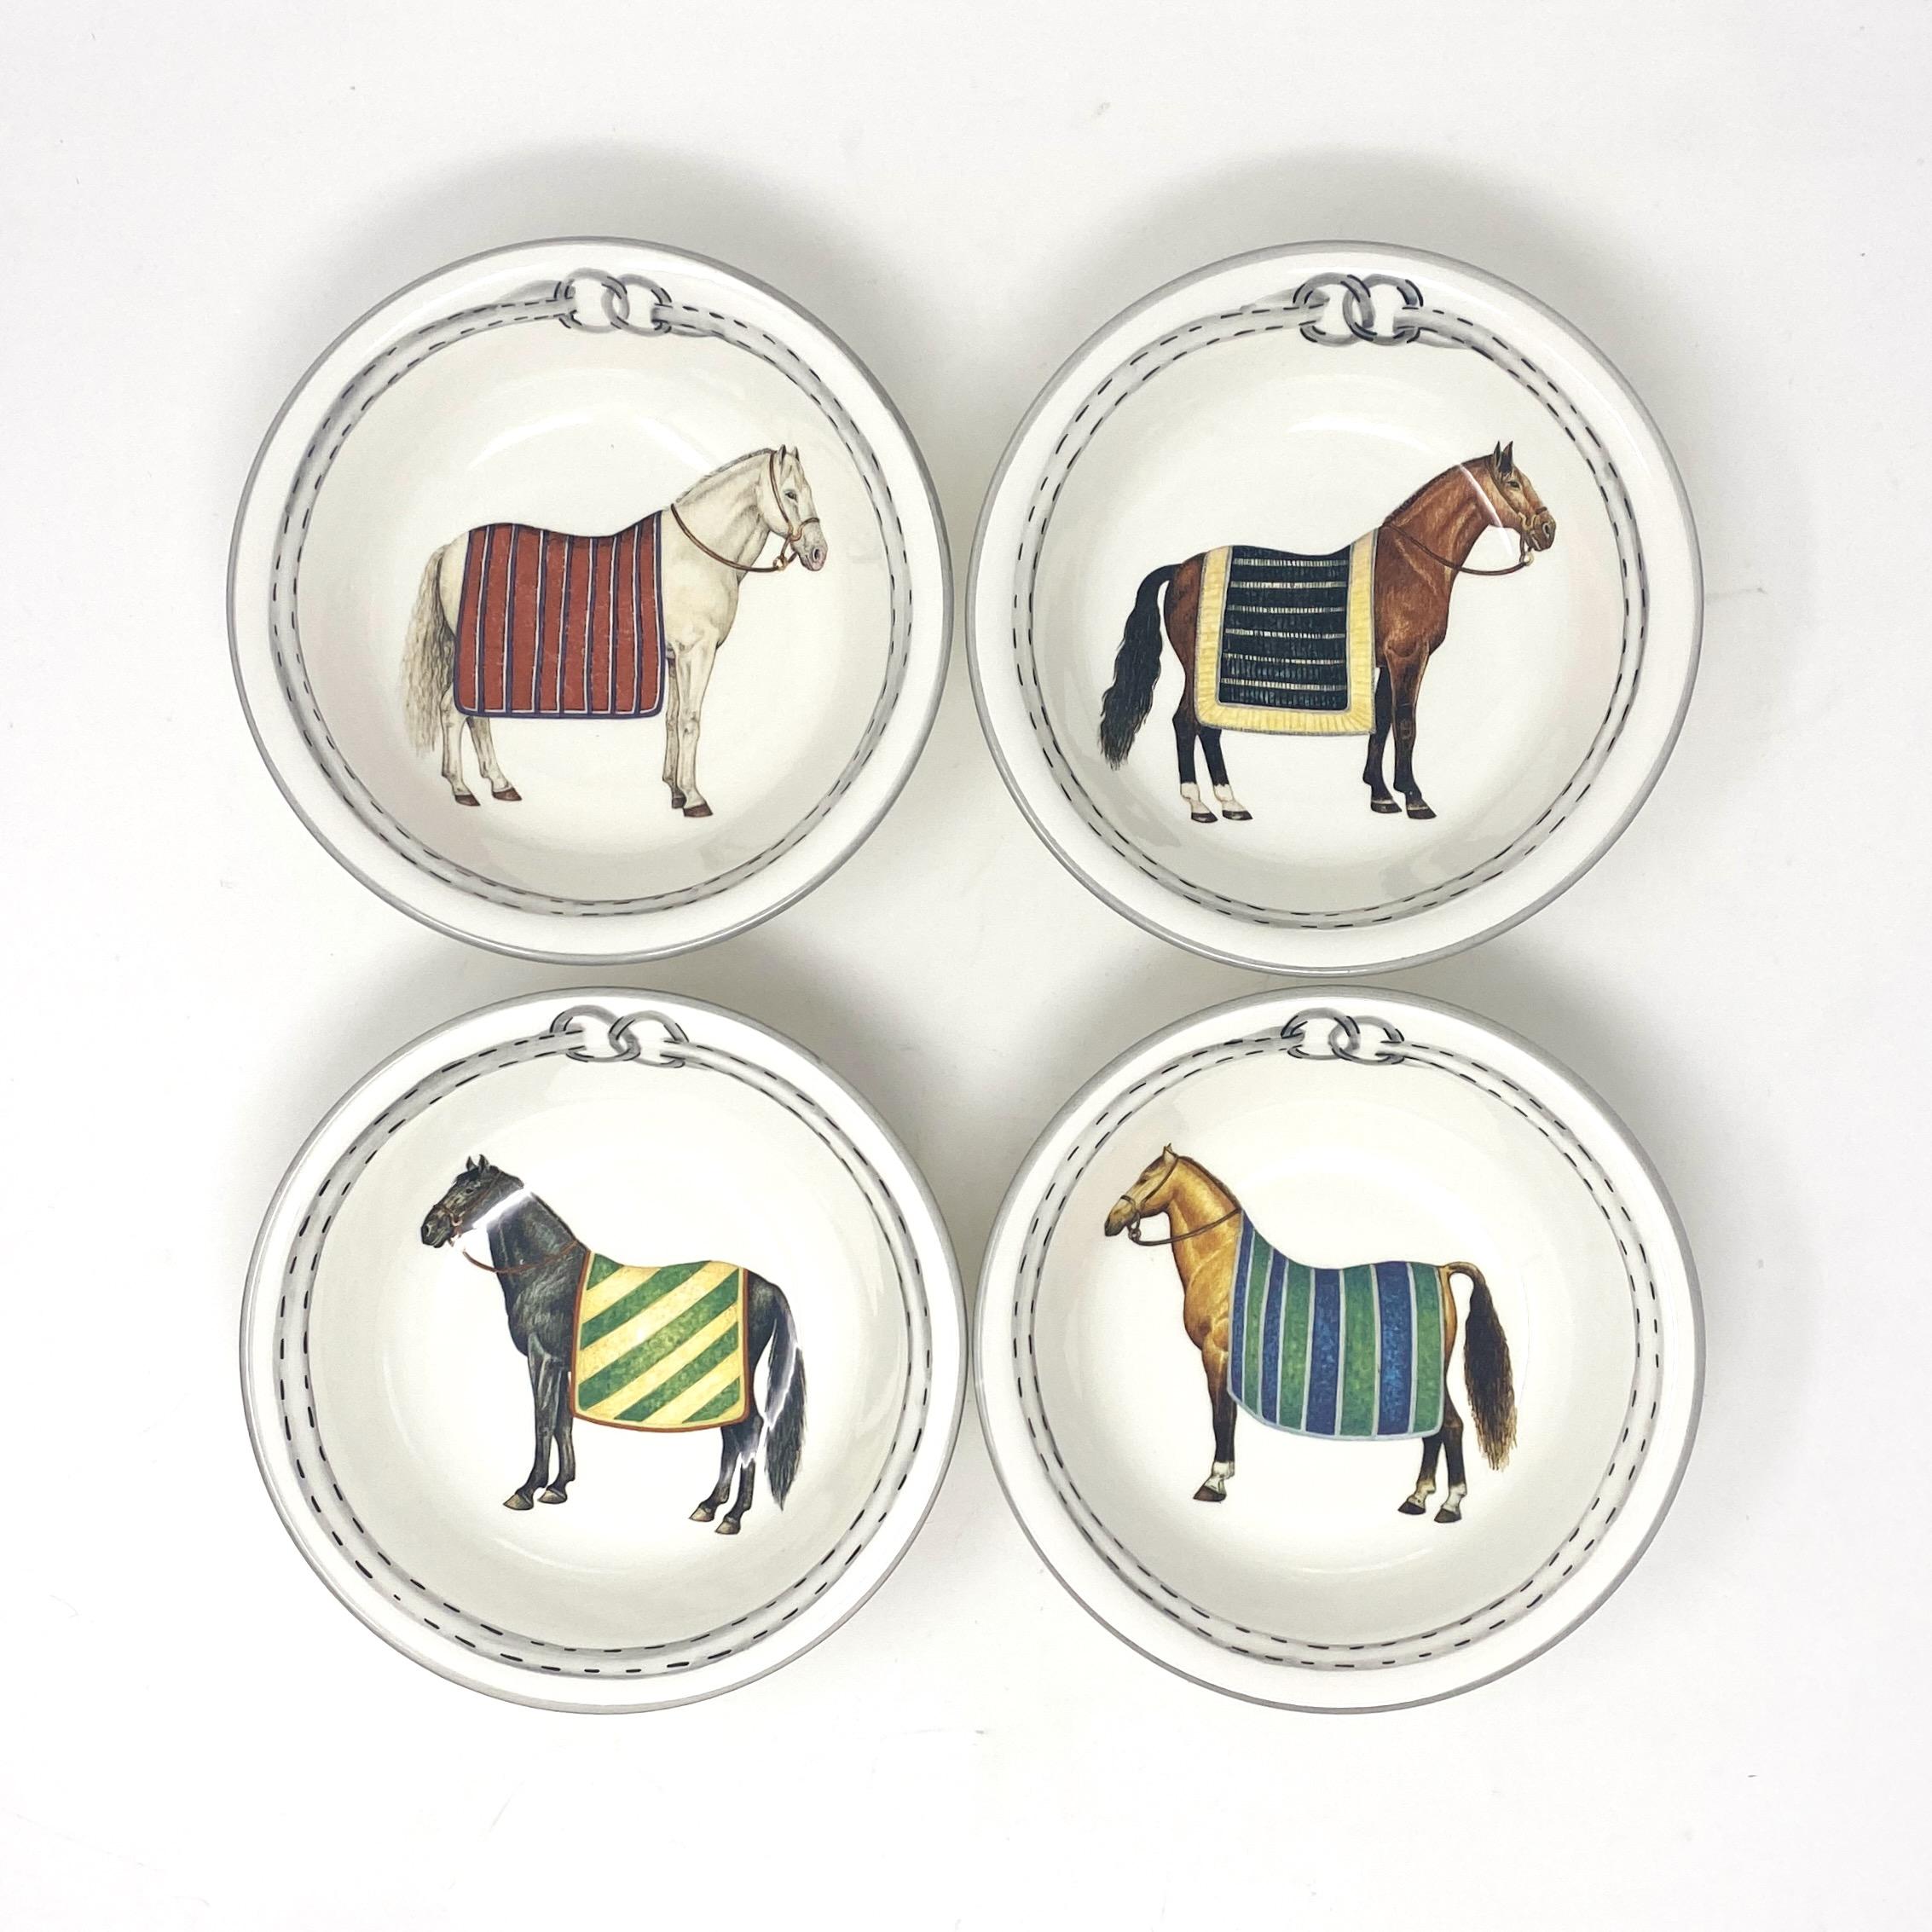 Equestrian Small Bowls, Set of 4. Each bowl features a unique blanketed horse. Made in Italy for The Mane Lion.

The Mane Lion was born in 1979 in the heart of Philadelphia's fabled Main Line, offering a line of charming, hand-painted chip-and-dip